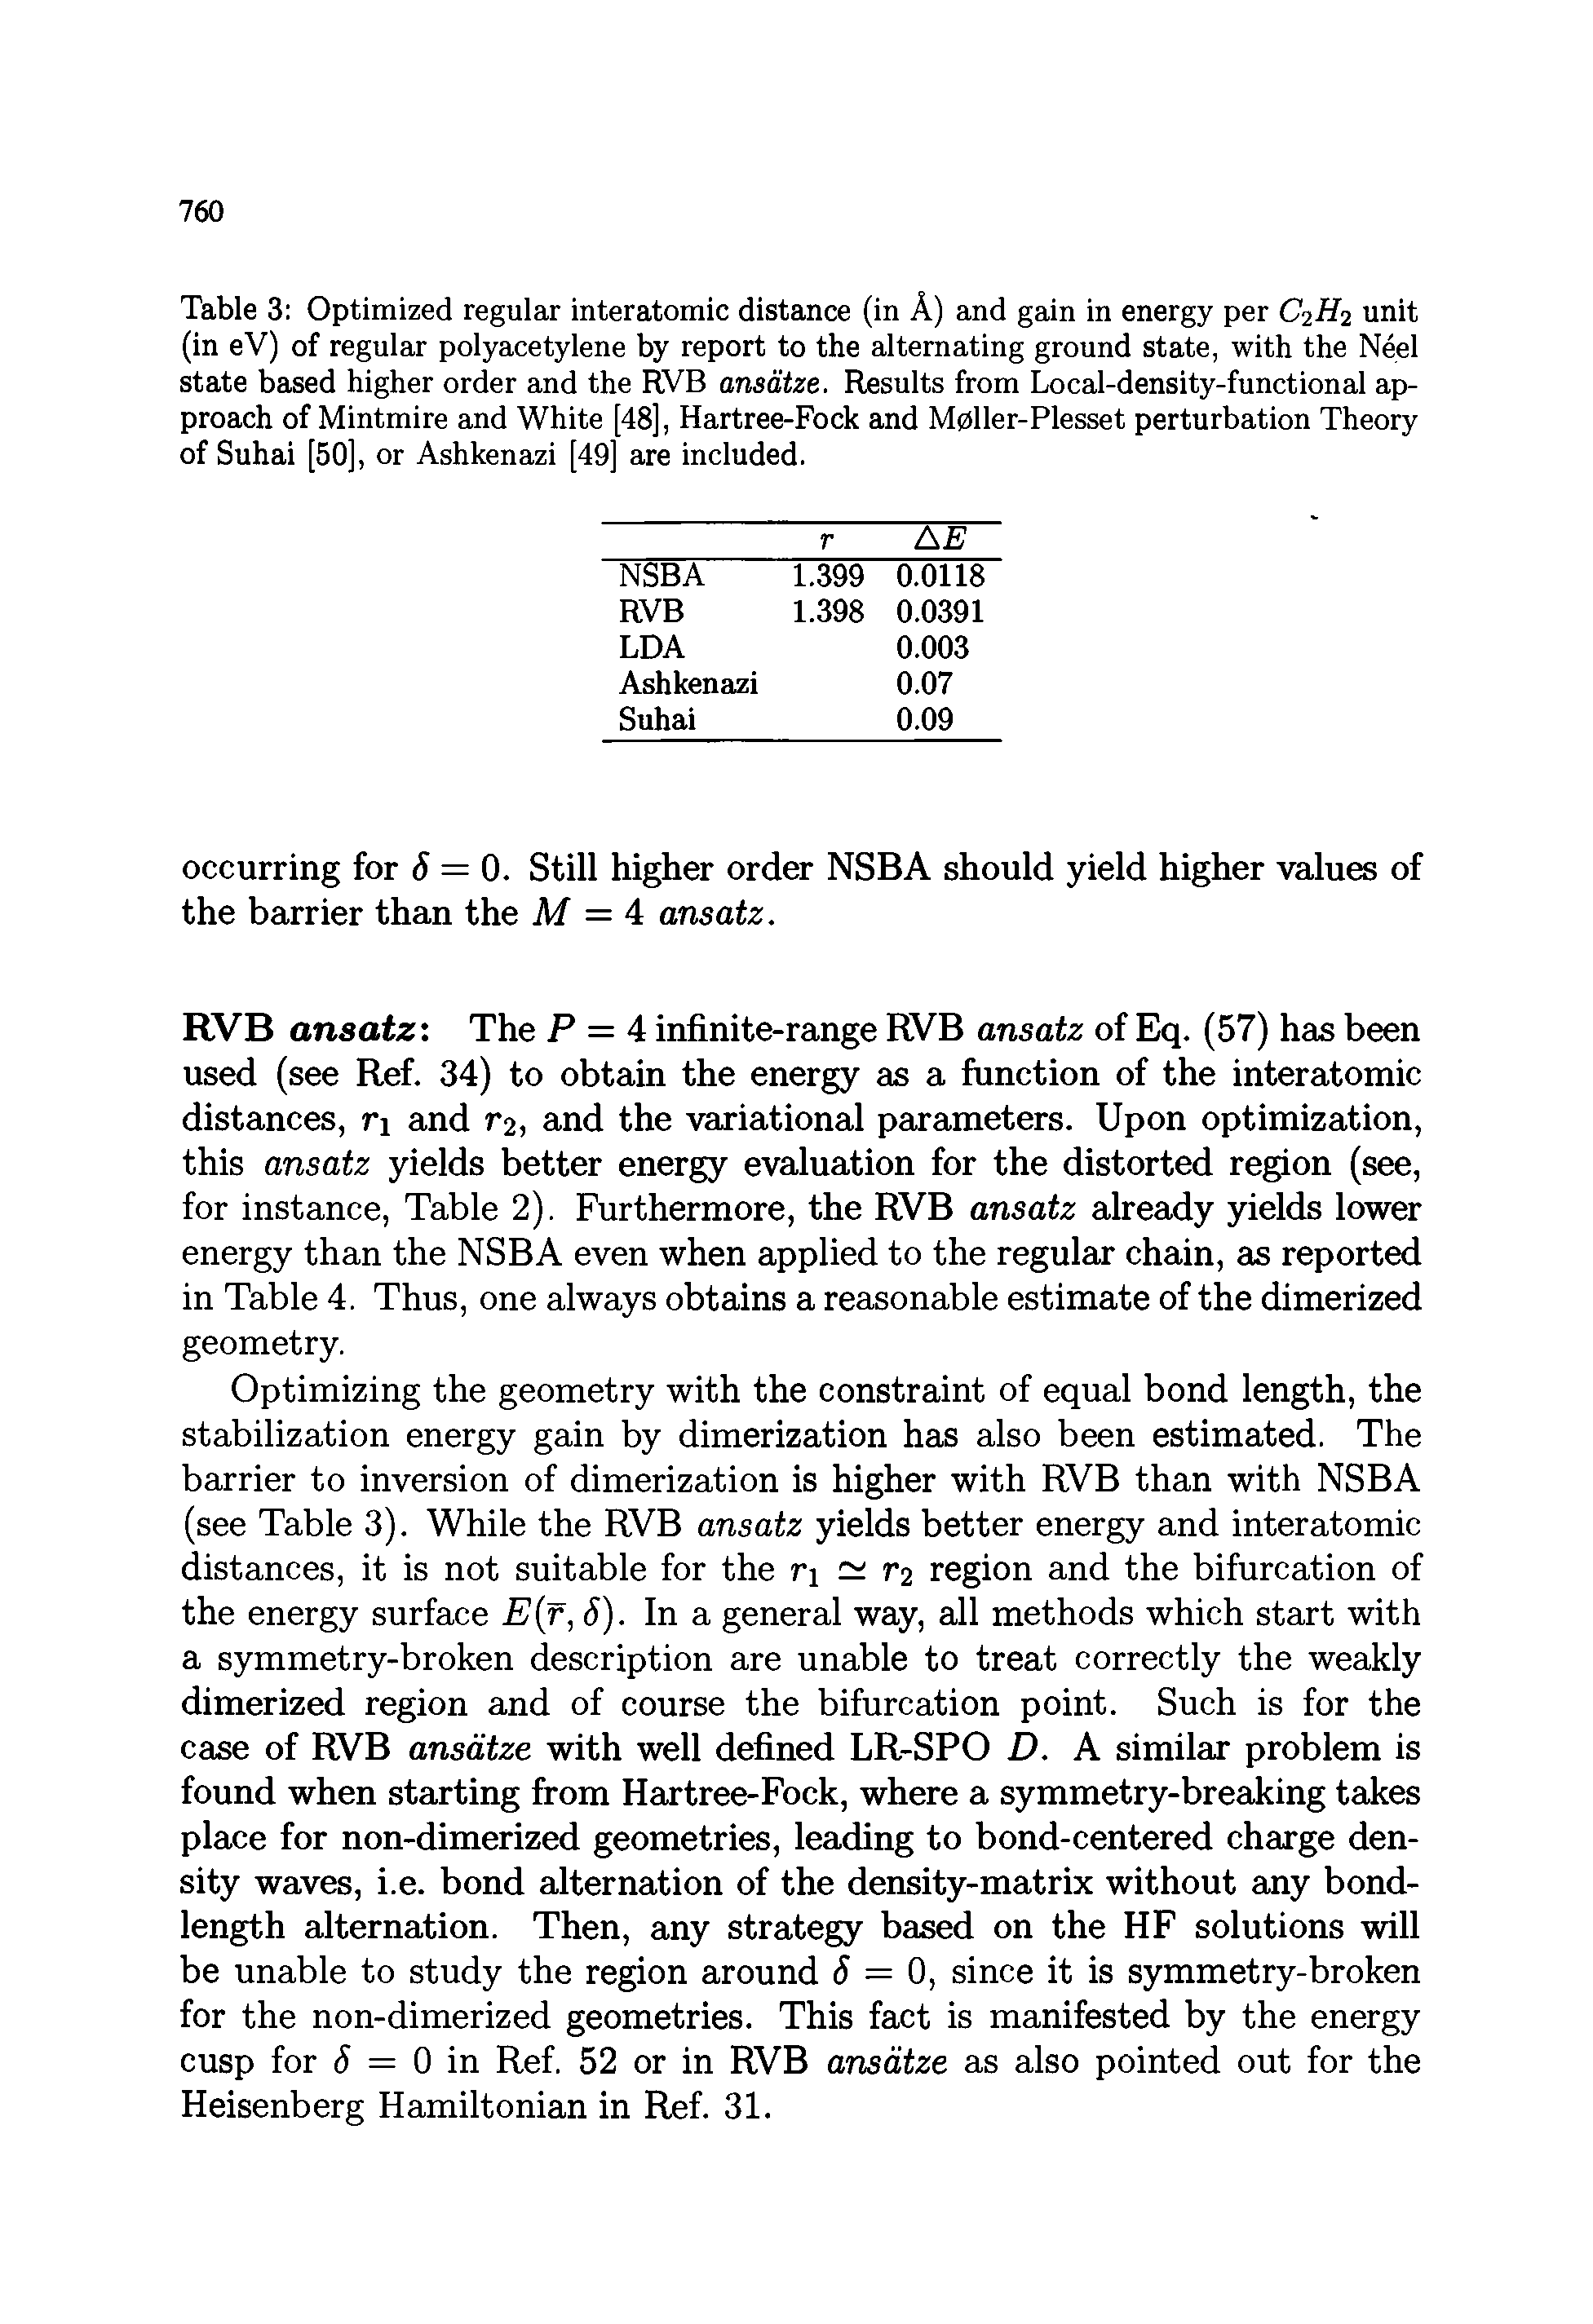 Table 3 Optimized regular interatomic distance (in A) and gain in energy per C2H2 unit (in eV) of regular polyacetylene by report to the alternating ground state, with the Neel state based higher order and the RVB ansatze. Results from Local-density-functional approach of Mintmire and White [48], Hartree-Fock and Mpller-Plesset perturbation Theory of Suhai [50], or Ashkenazi [49] are included.